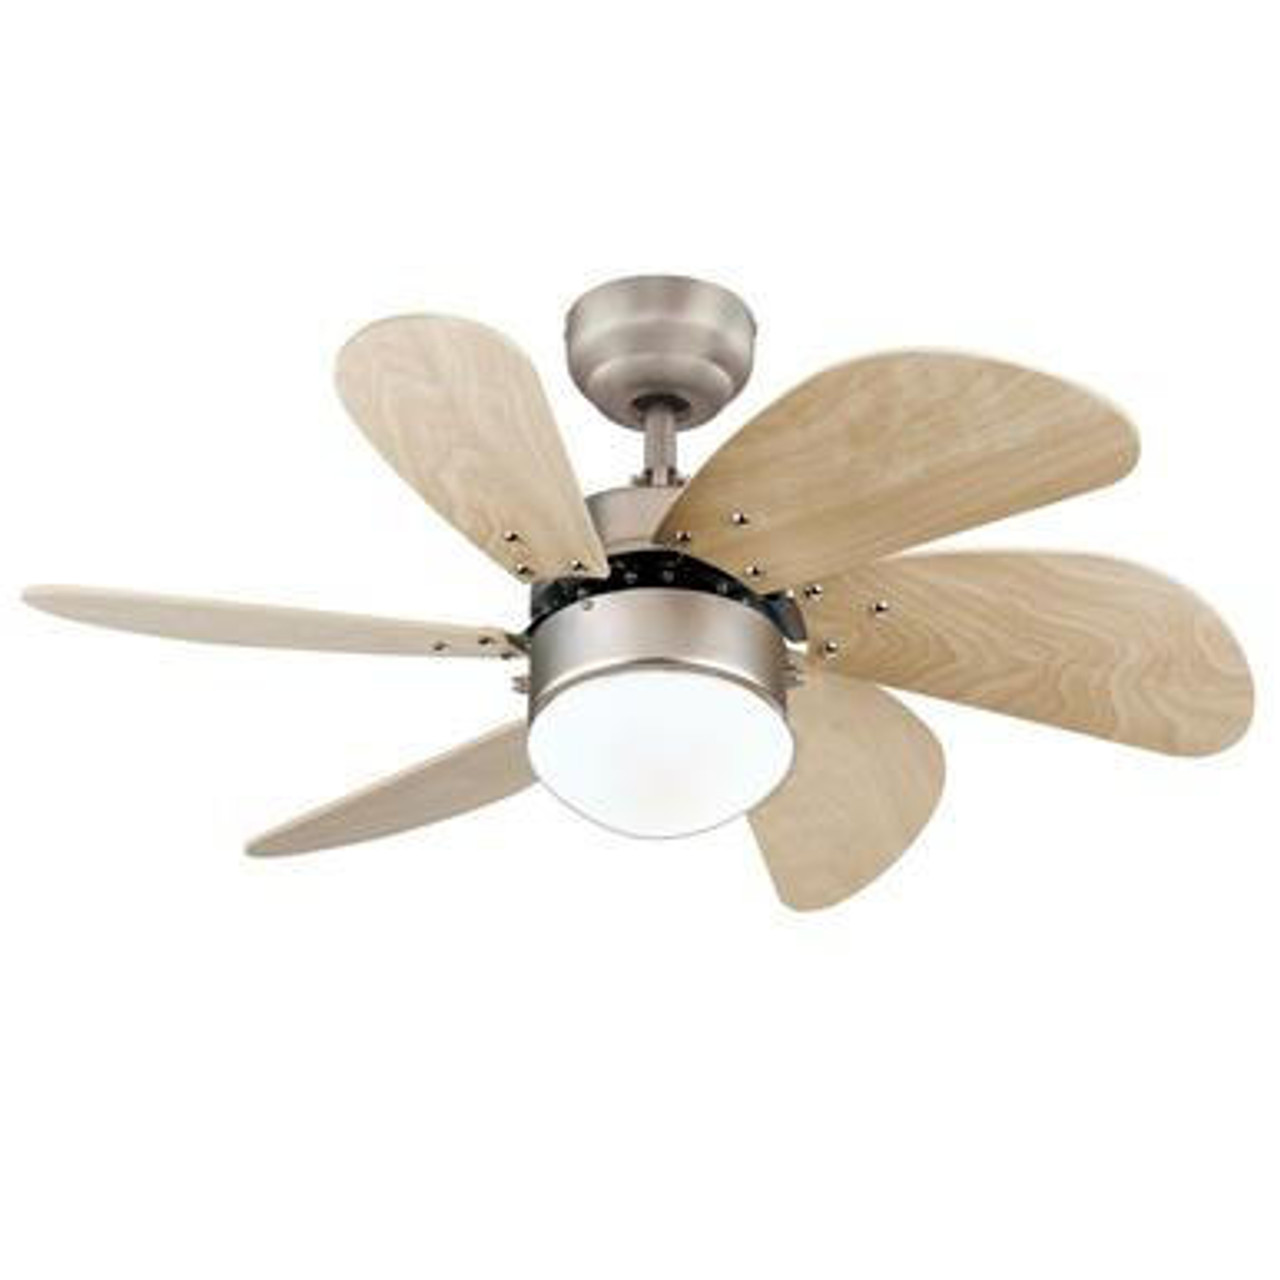 https://cdn11.bigcommerce.com/s-l1vcnscnv/images/stencil/1280x1280/products/81581/119865/westinghouse-lighting-westinghouse-7224000-turbo-swirl-30-inch-indoor-ceiling-fan-with-dimmable-led-light-fixture__64680.1680729543.jpg?c=2